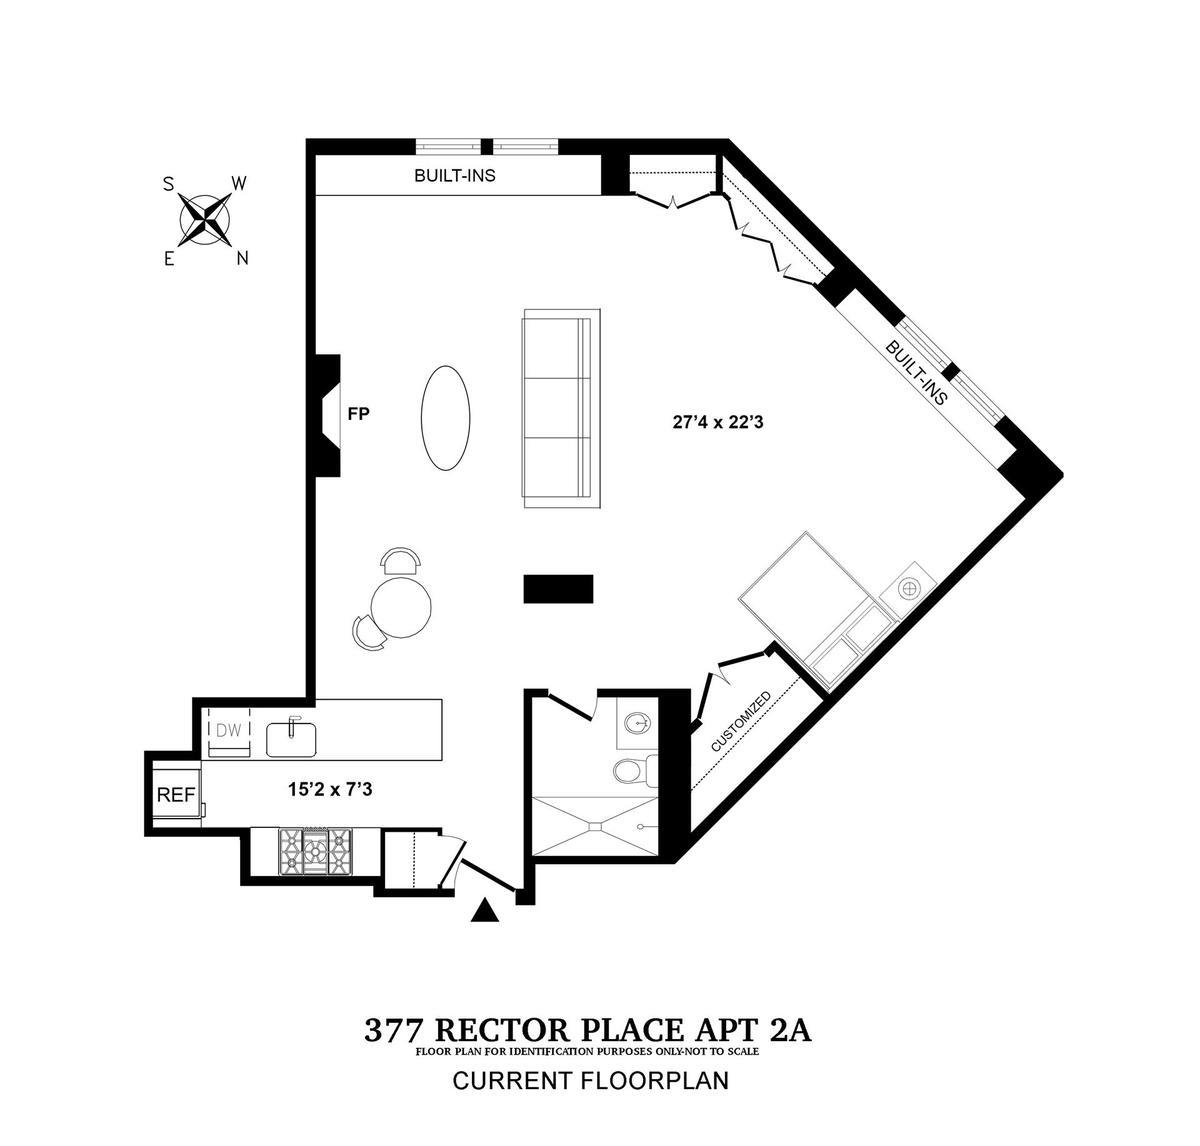 Floorplan for 377 Rector Place, 2-A